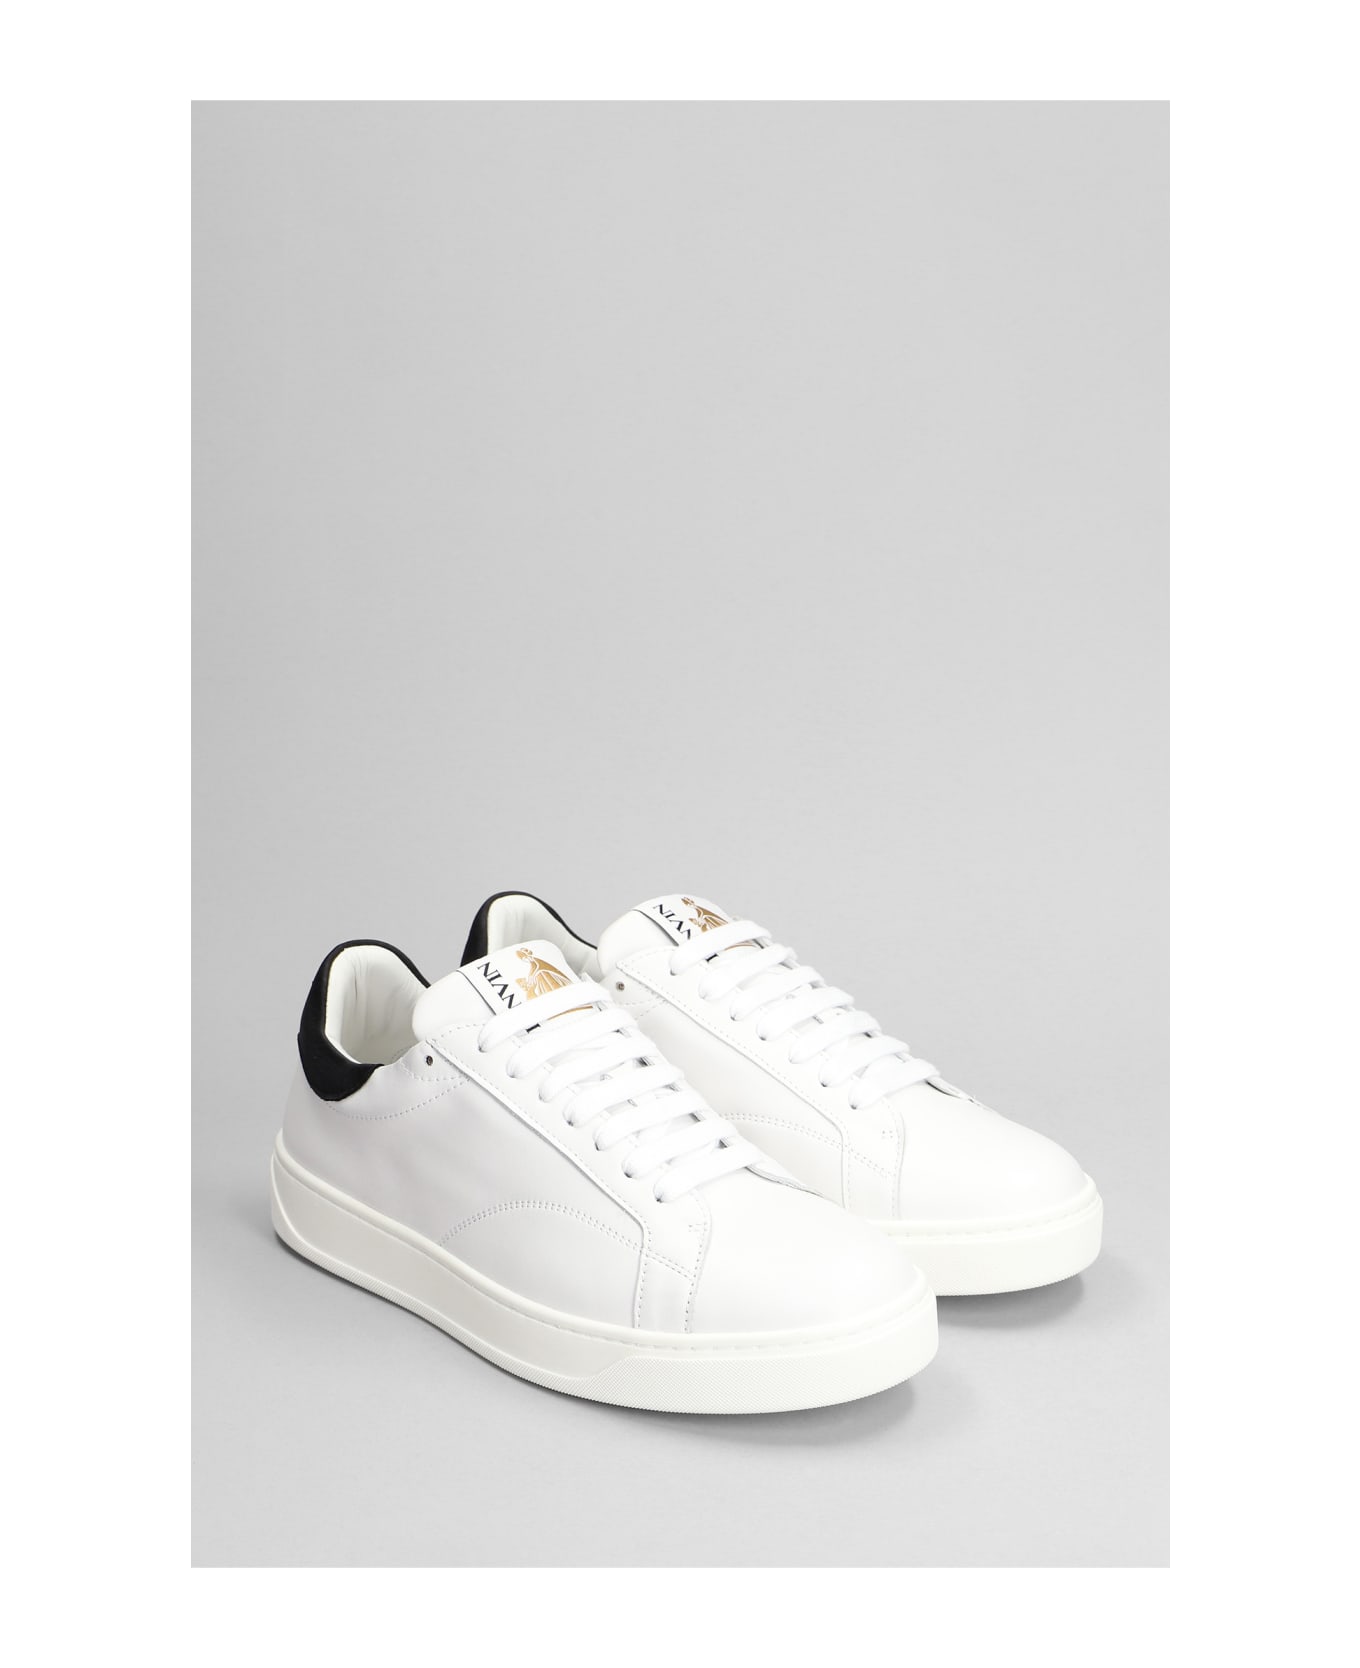 Lanvin Ddb0 Sneakers In White Leather - white